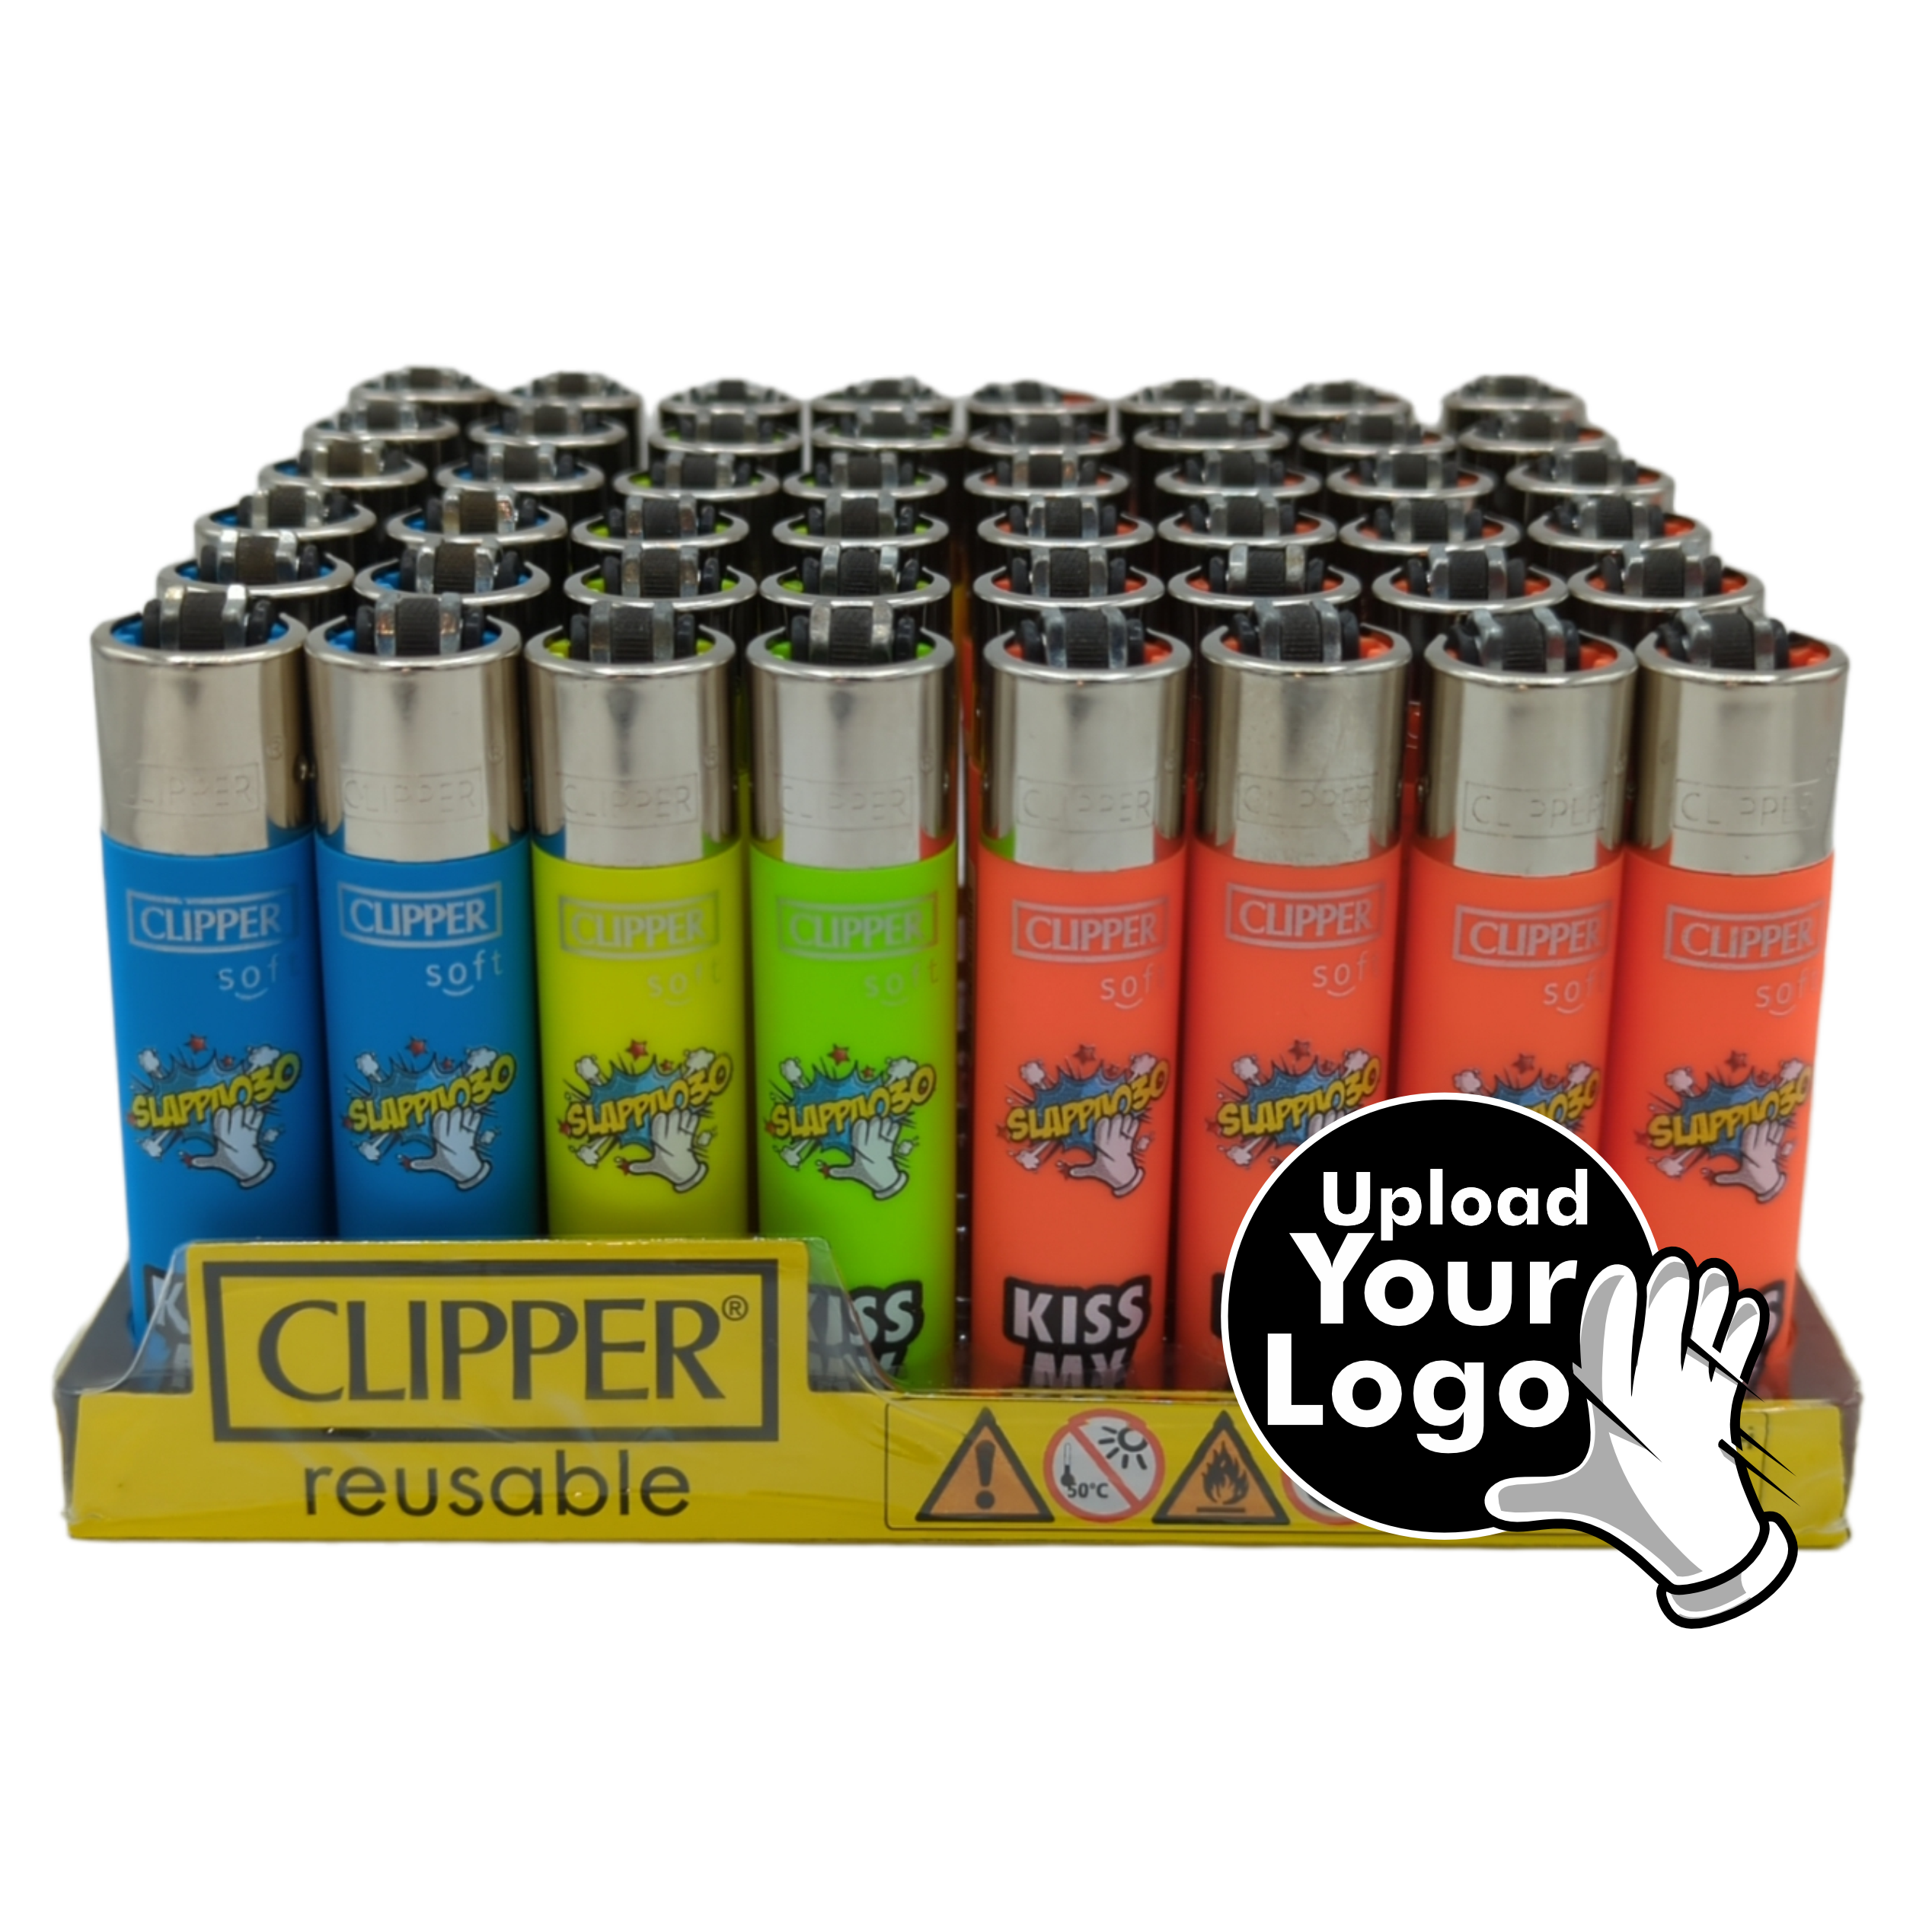 Soft Touch Clipper Lighters Direct Printed